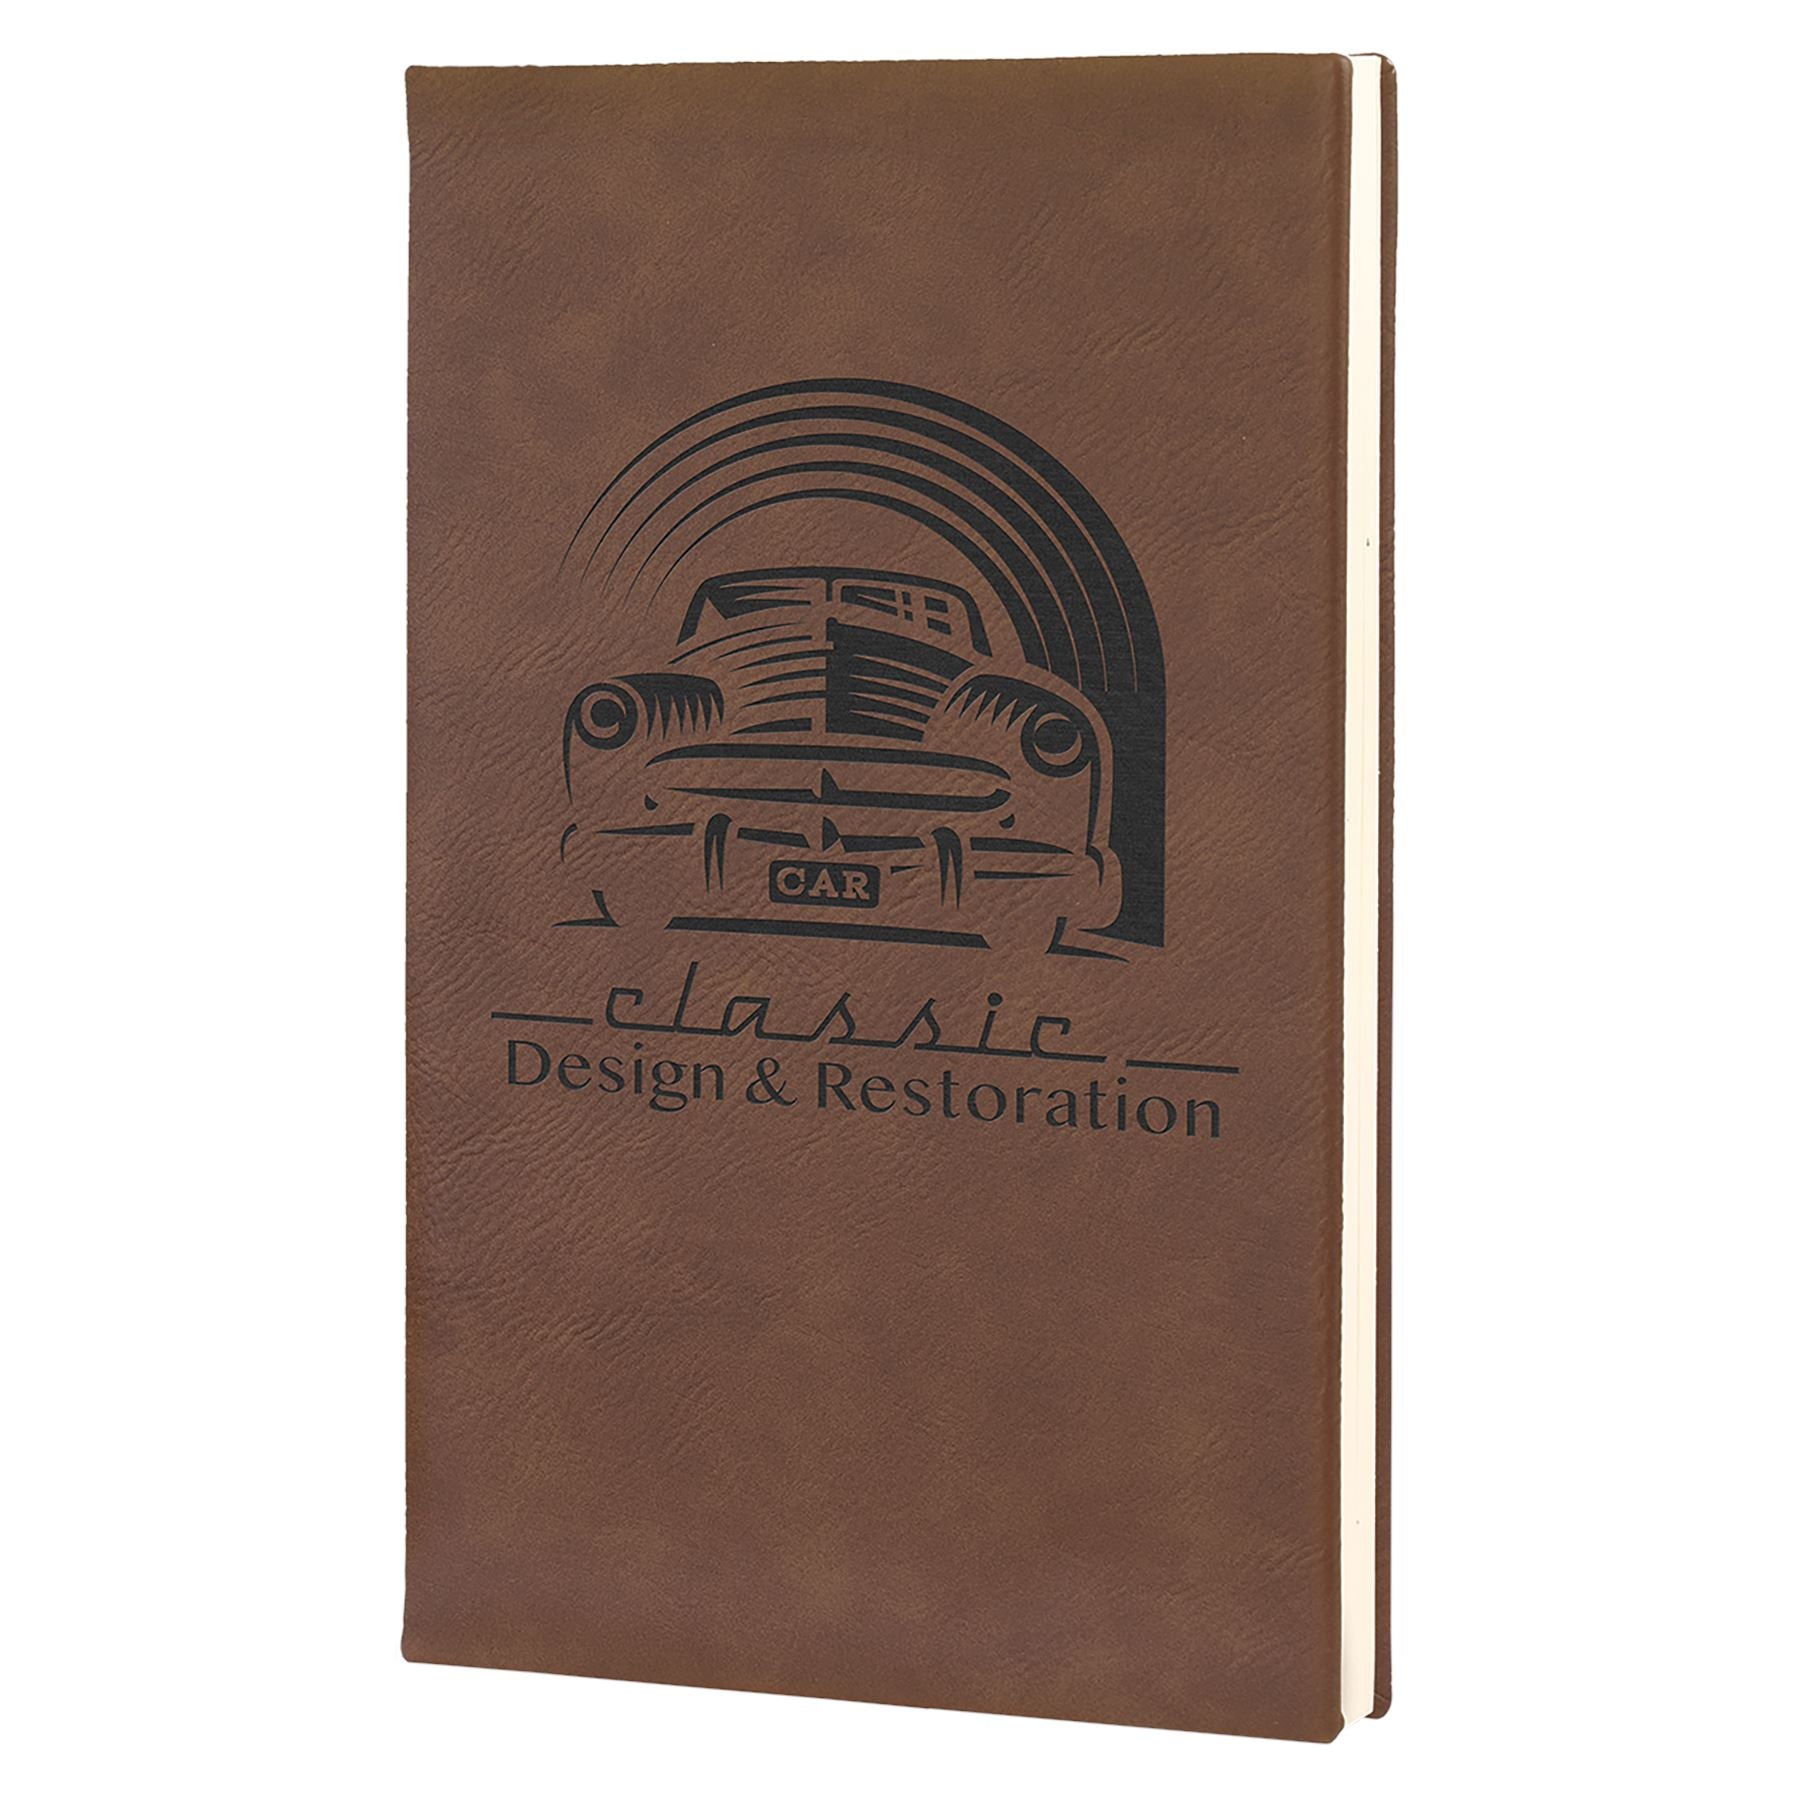 Sketch Book-Unlined Paper, 5 1/4" x 8 1/4" Laserable Leatherette, Laser Engraved Journal Craftworks NW 